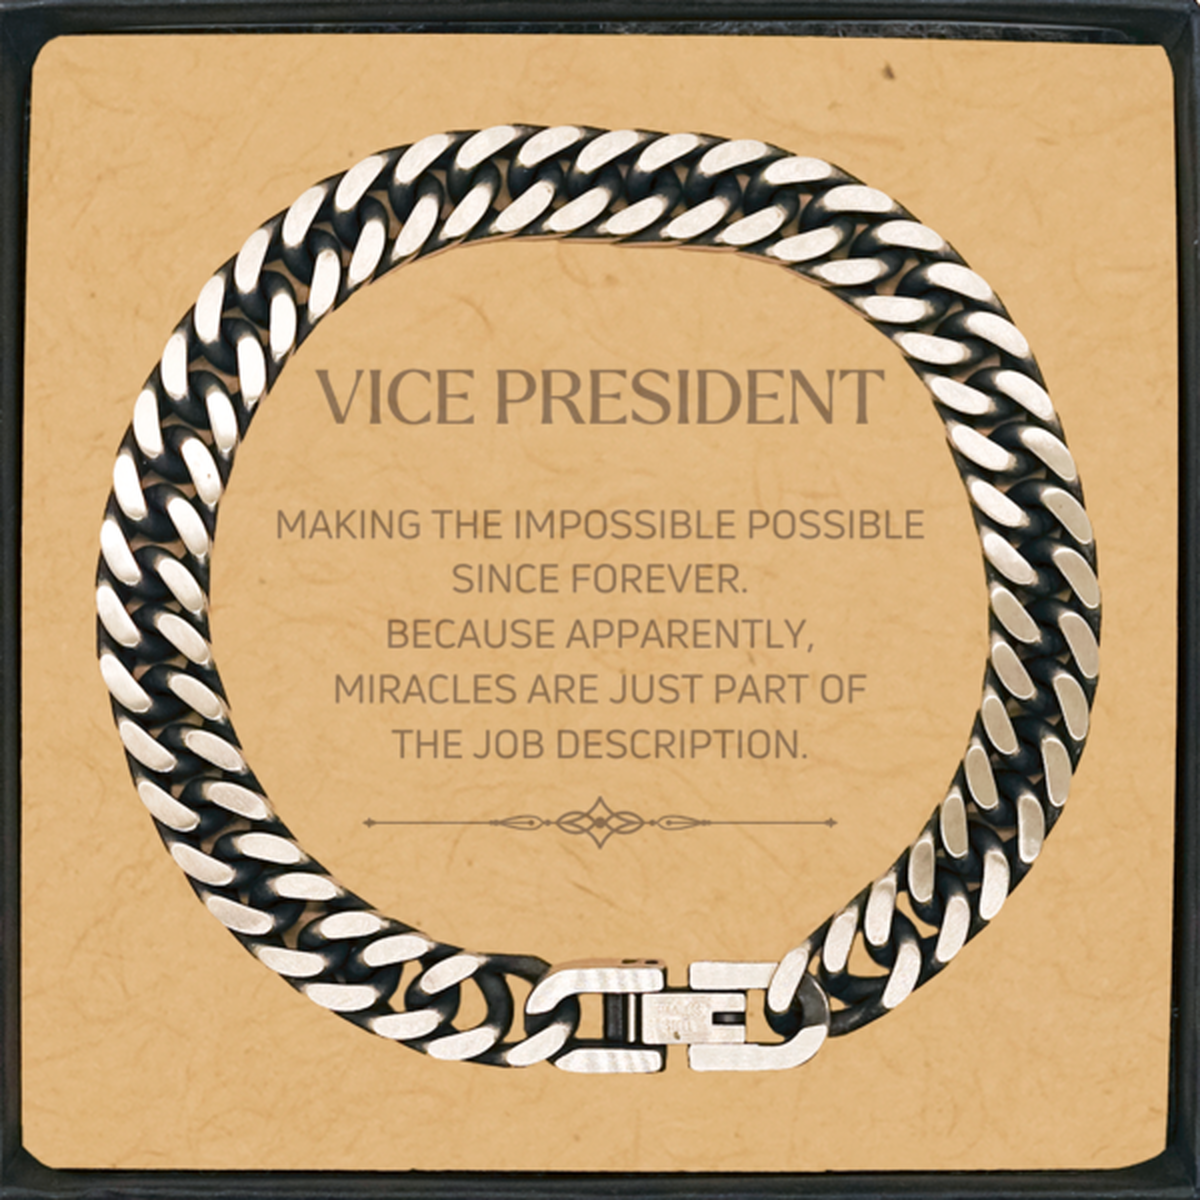 Funny Vice President Gifts, Miracles are just part of the job description, Inspirational Birthday Cuban Link Chain Bracelet For Vice President, Men, Women, Coworkers, Friends, Boss